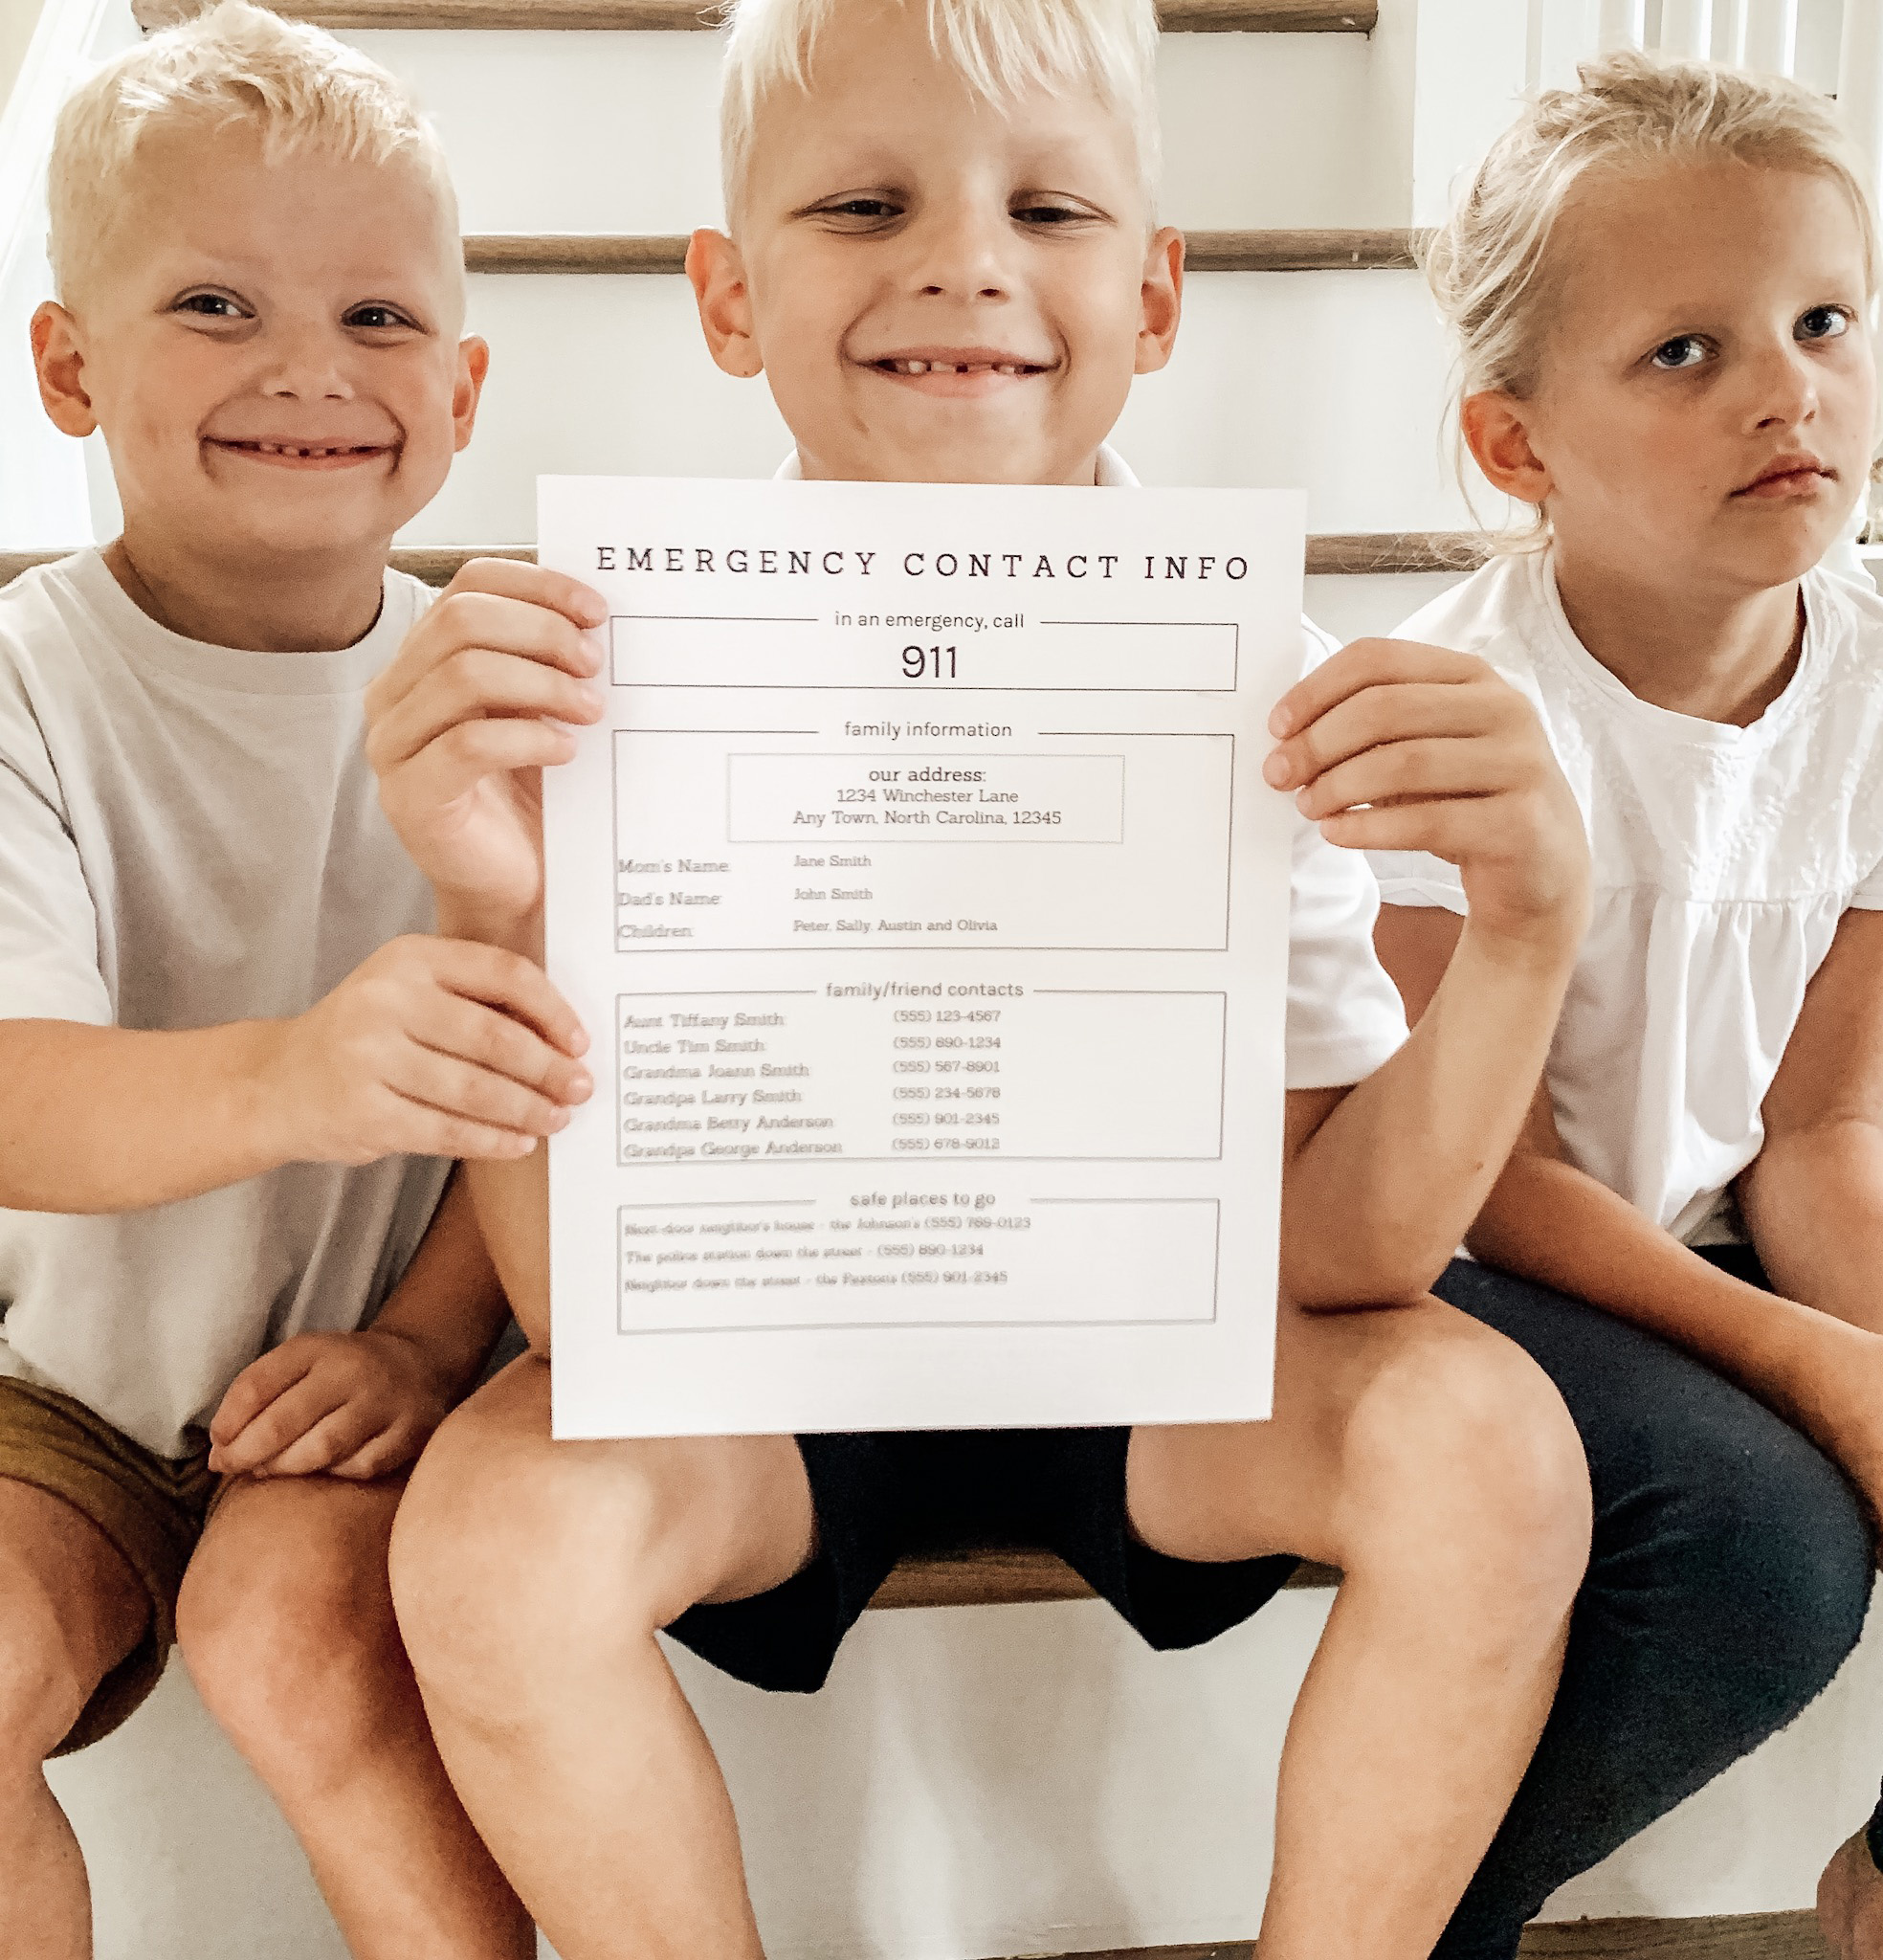 Kids on stairs holding an emergency contact info paper